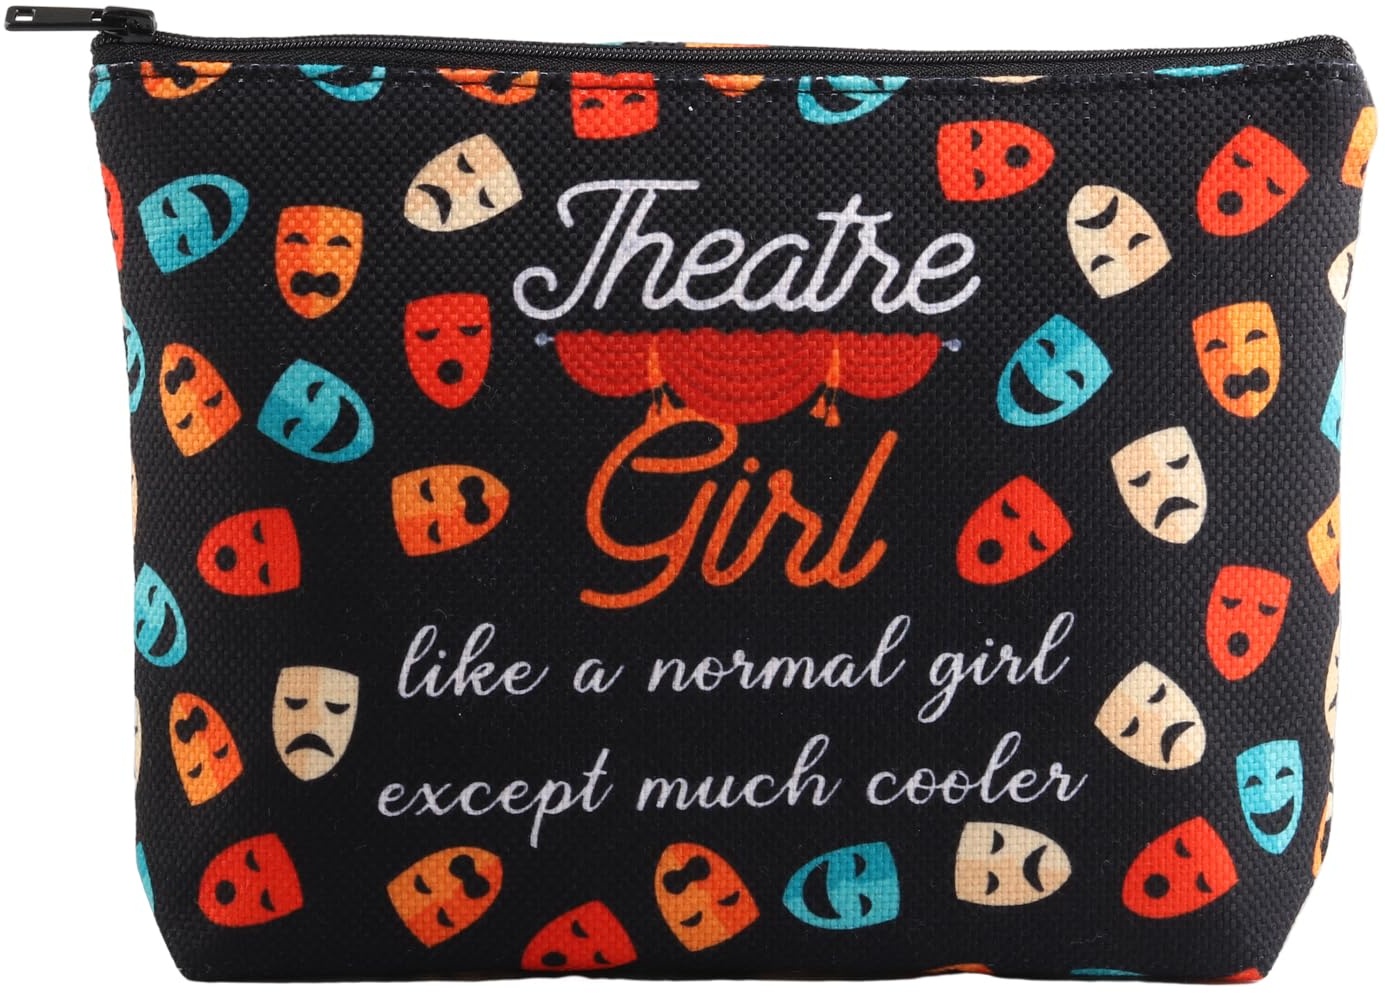 AKTAP Theater Girl Like a Normal Girl Except Much Cooler Drama Theater Masken Gemusterte Tasche Theater Make-up Tasche, Theater-Make-up-Tasche, modisch